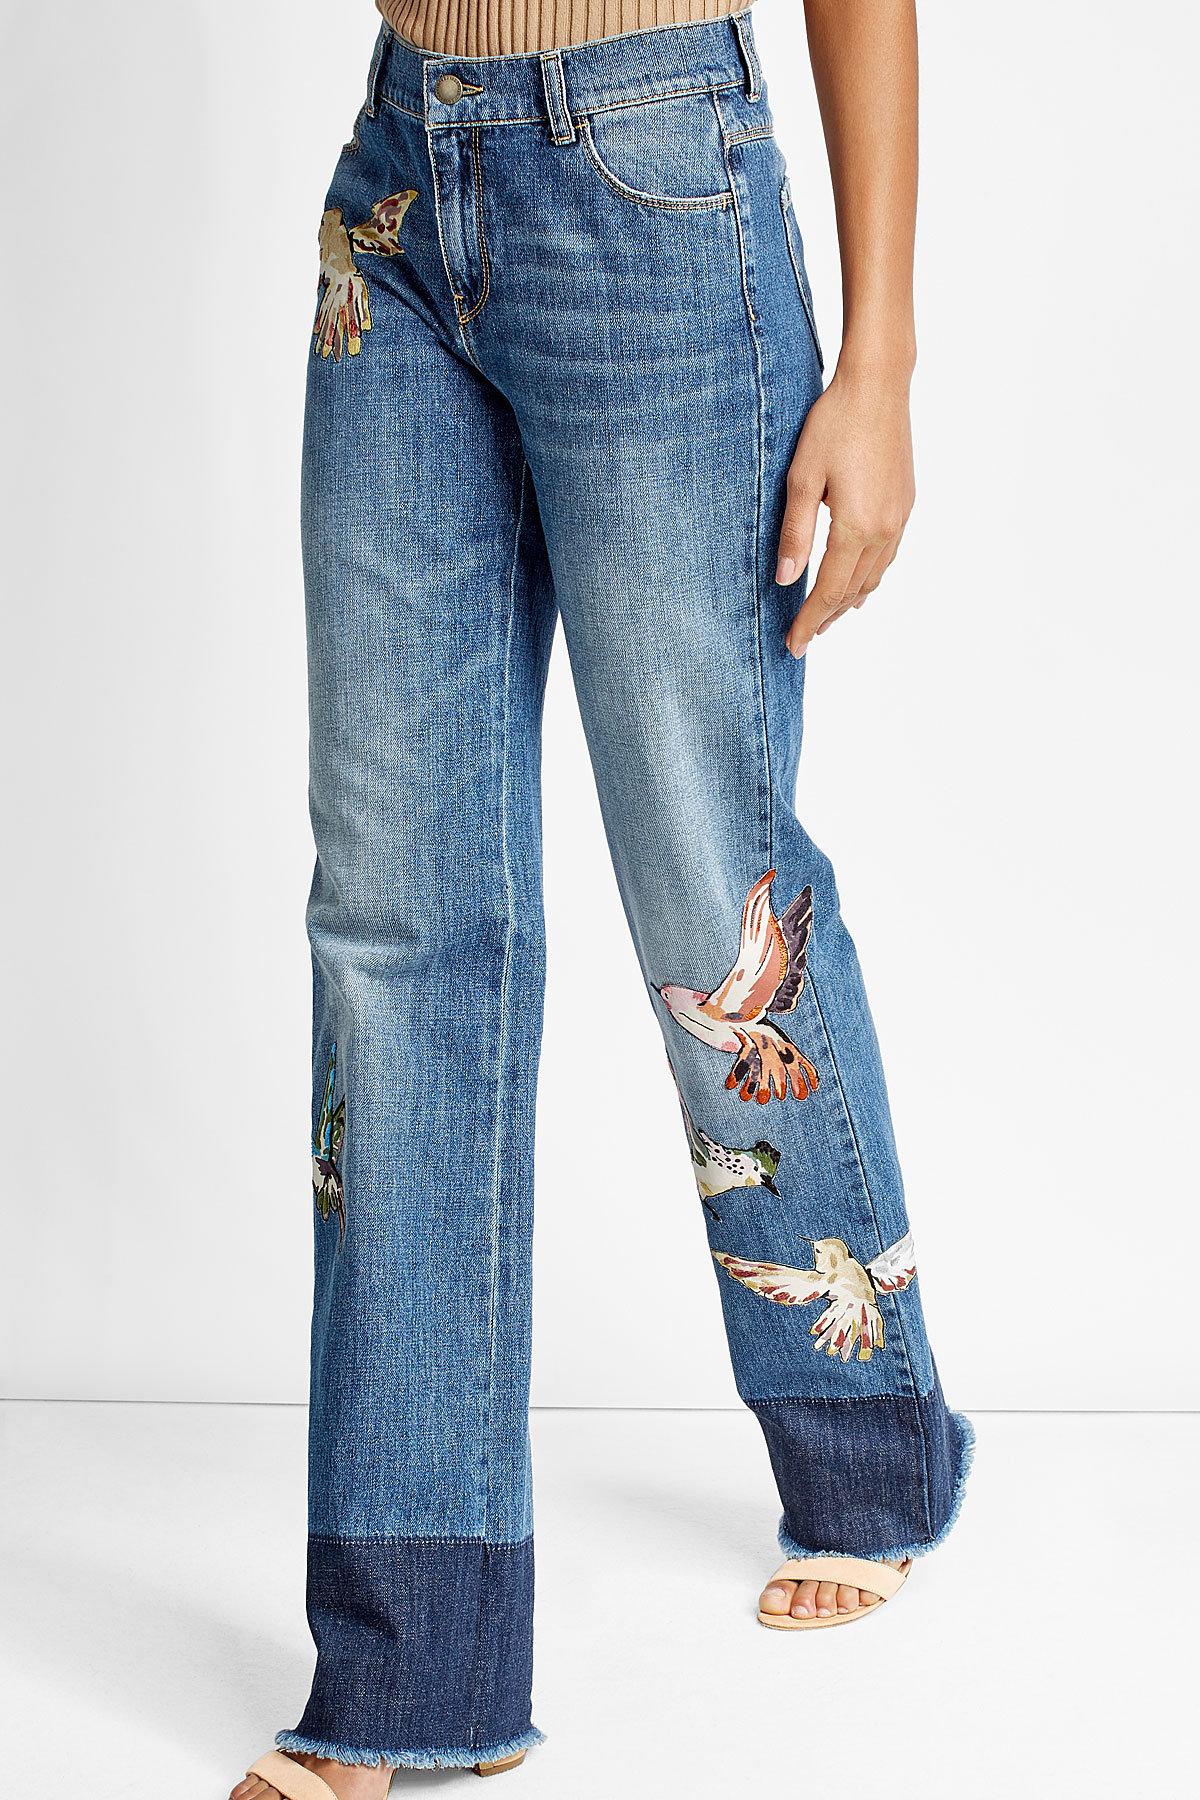 red straight leg jeans